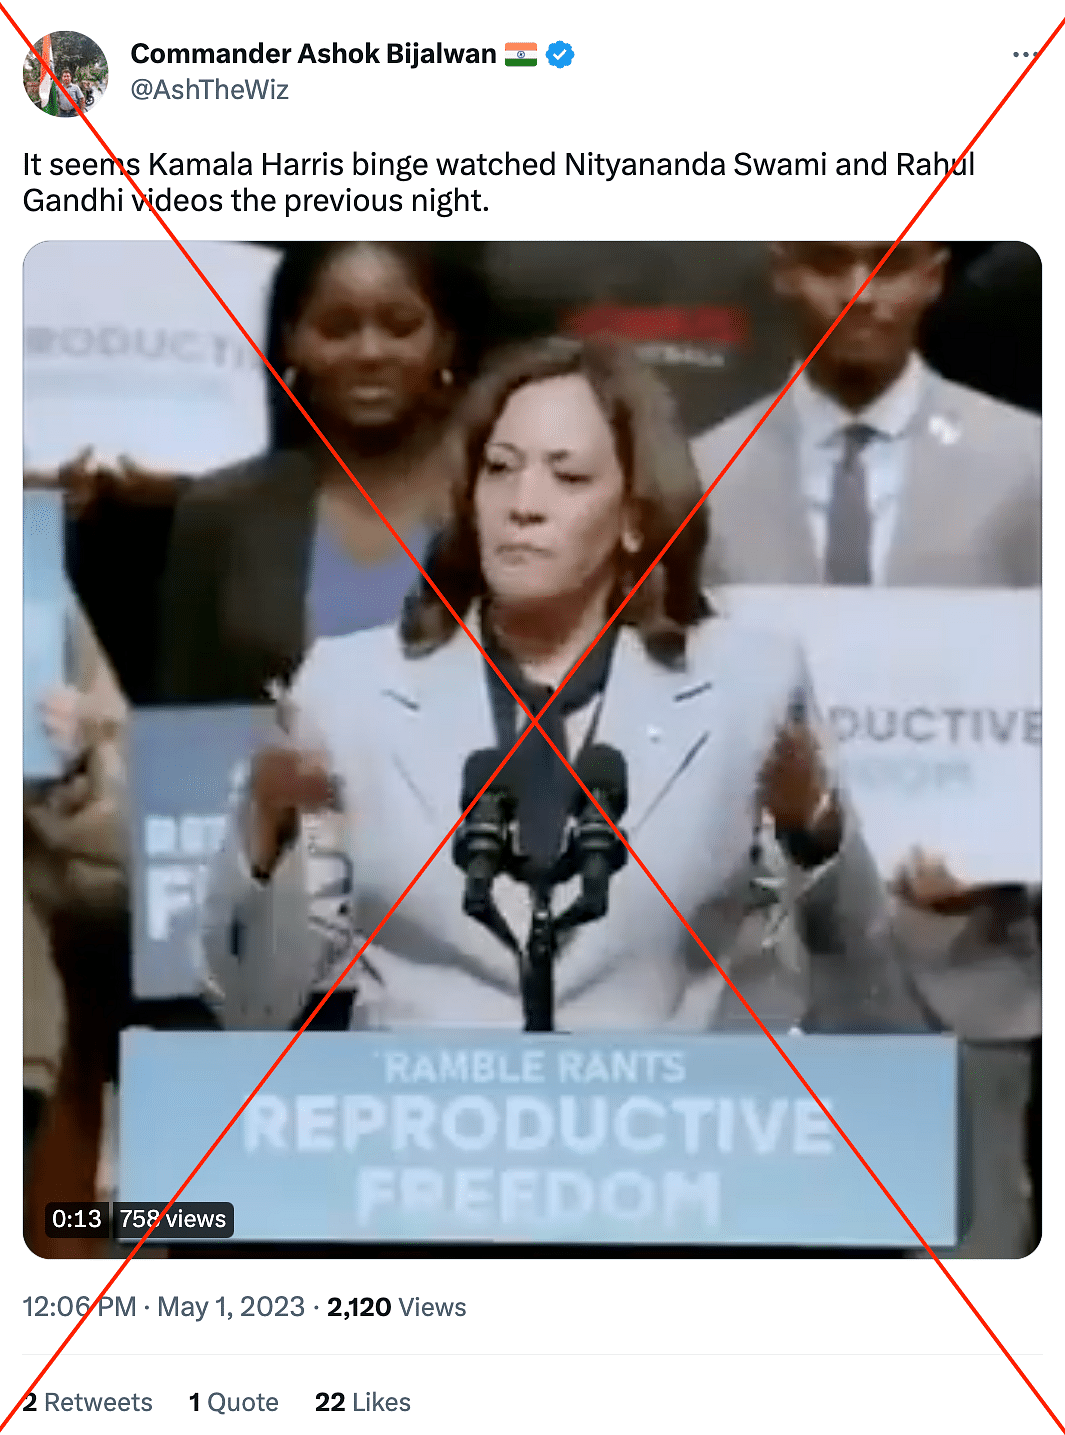 The video of US Vice President Kamala Harris has been edited to add the voiceover of an impersonator.